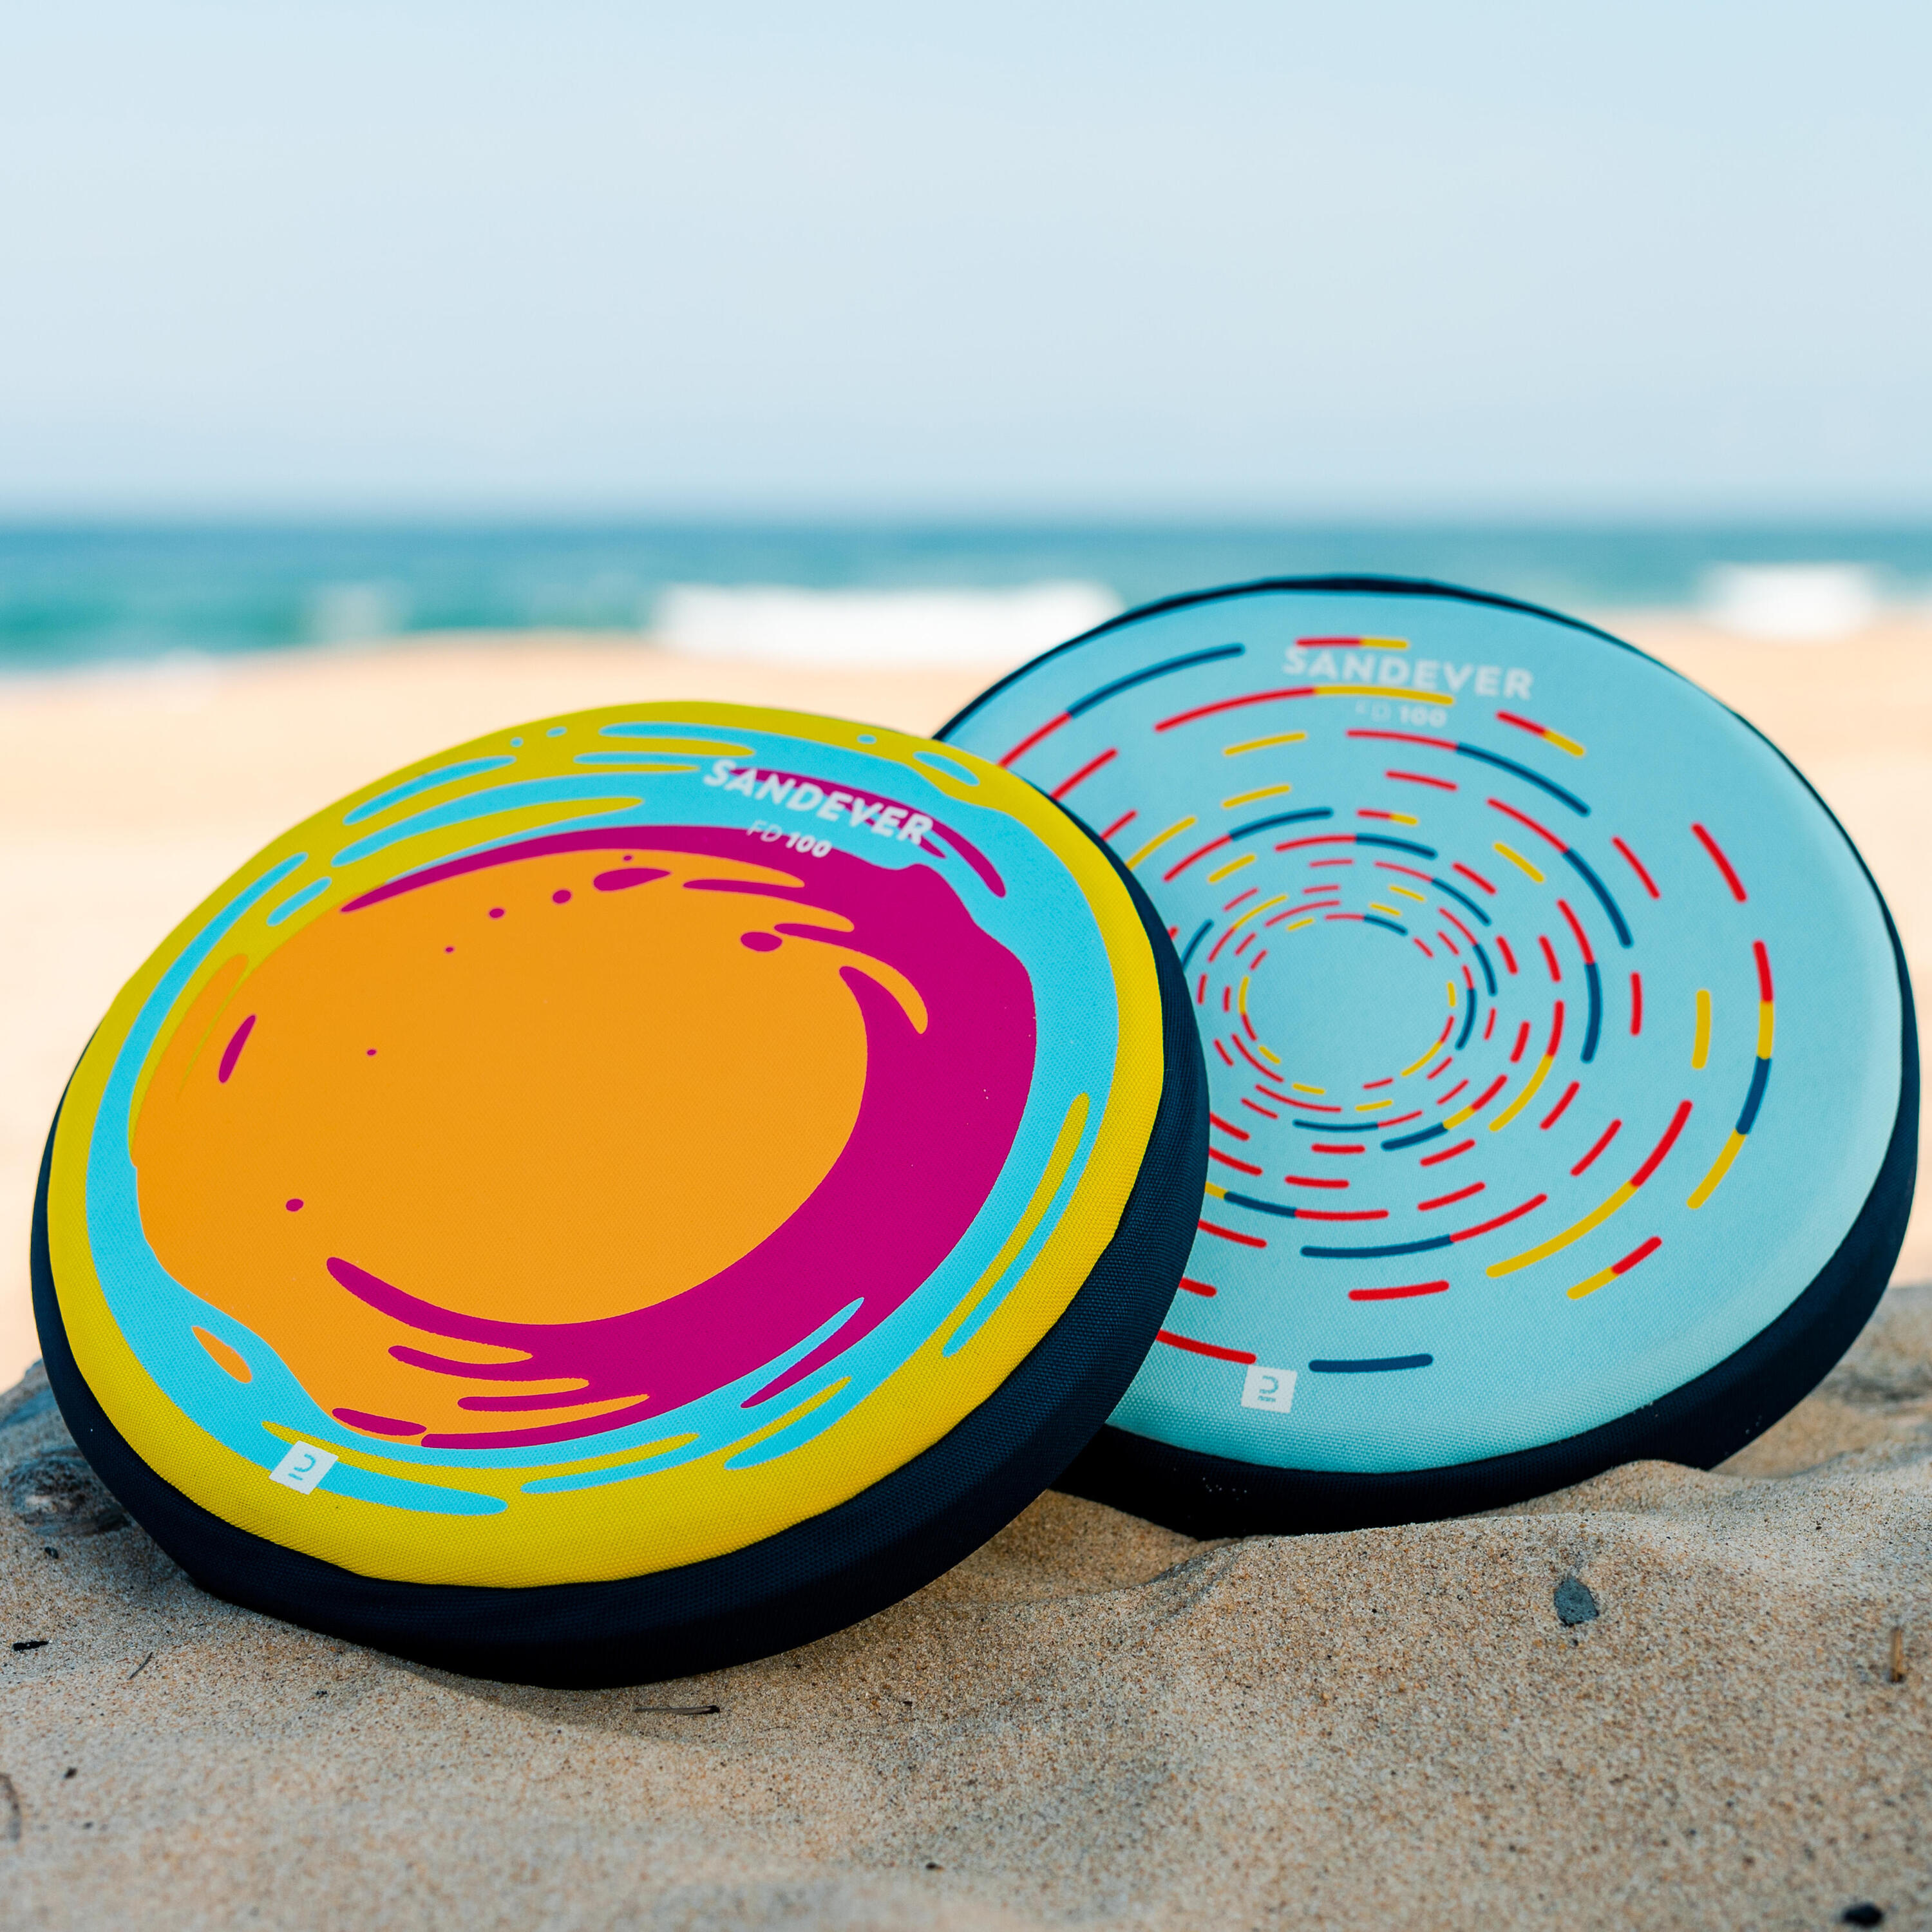 the ultra-soft Splash Orange disc lets you throw without worrying about impacts. 3/8